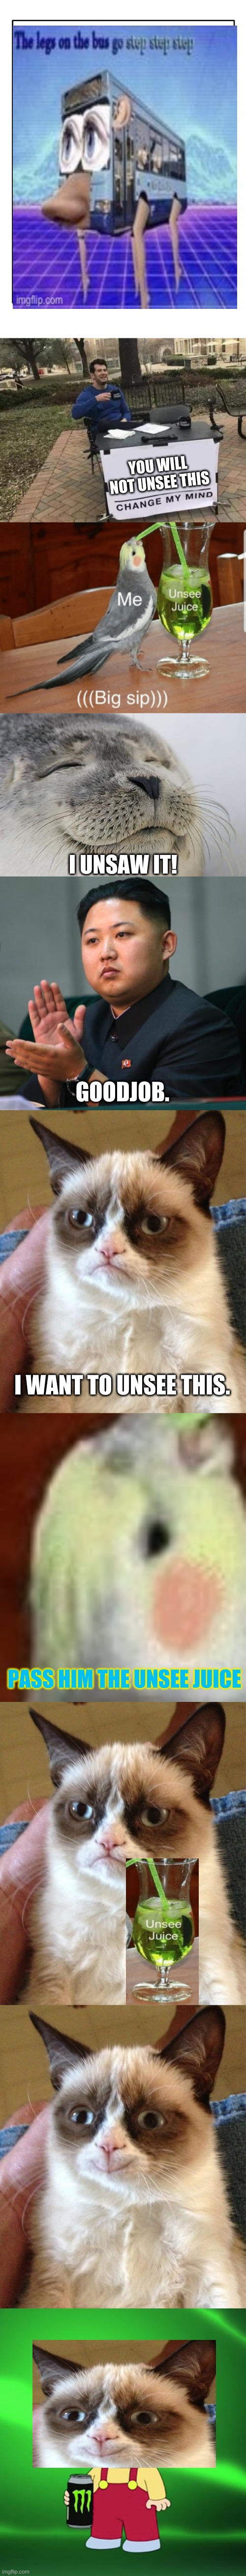 Sit back relax grab some UNSEE JUICE and look at the picture. | YOU WILL NOT UNSEE THIS; I UNSAW IT! GOODJOB. I WANT TO UNSEE THIS. PASS HIM THE UNSEE JUICE | image tagged in memes,grumpy cat,grumpy cat happy,clap,satisfied seal,hyper | made w/ Imgflip meme maker